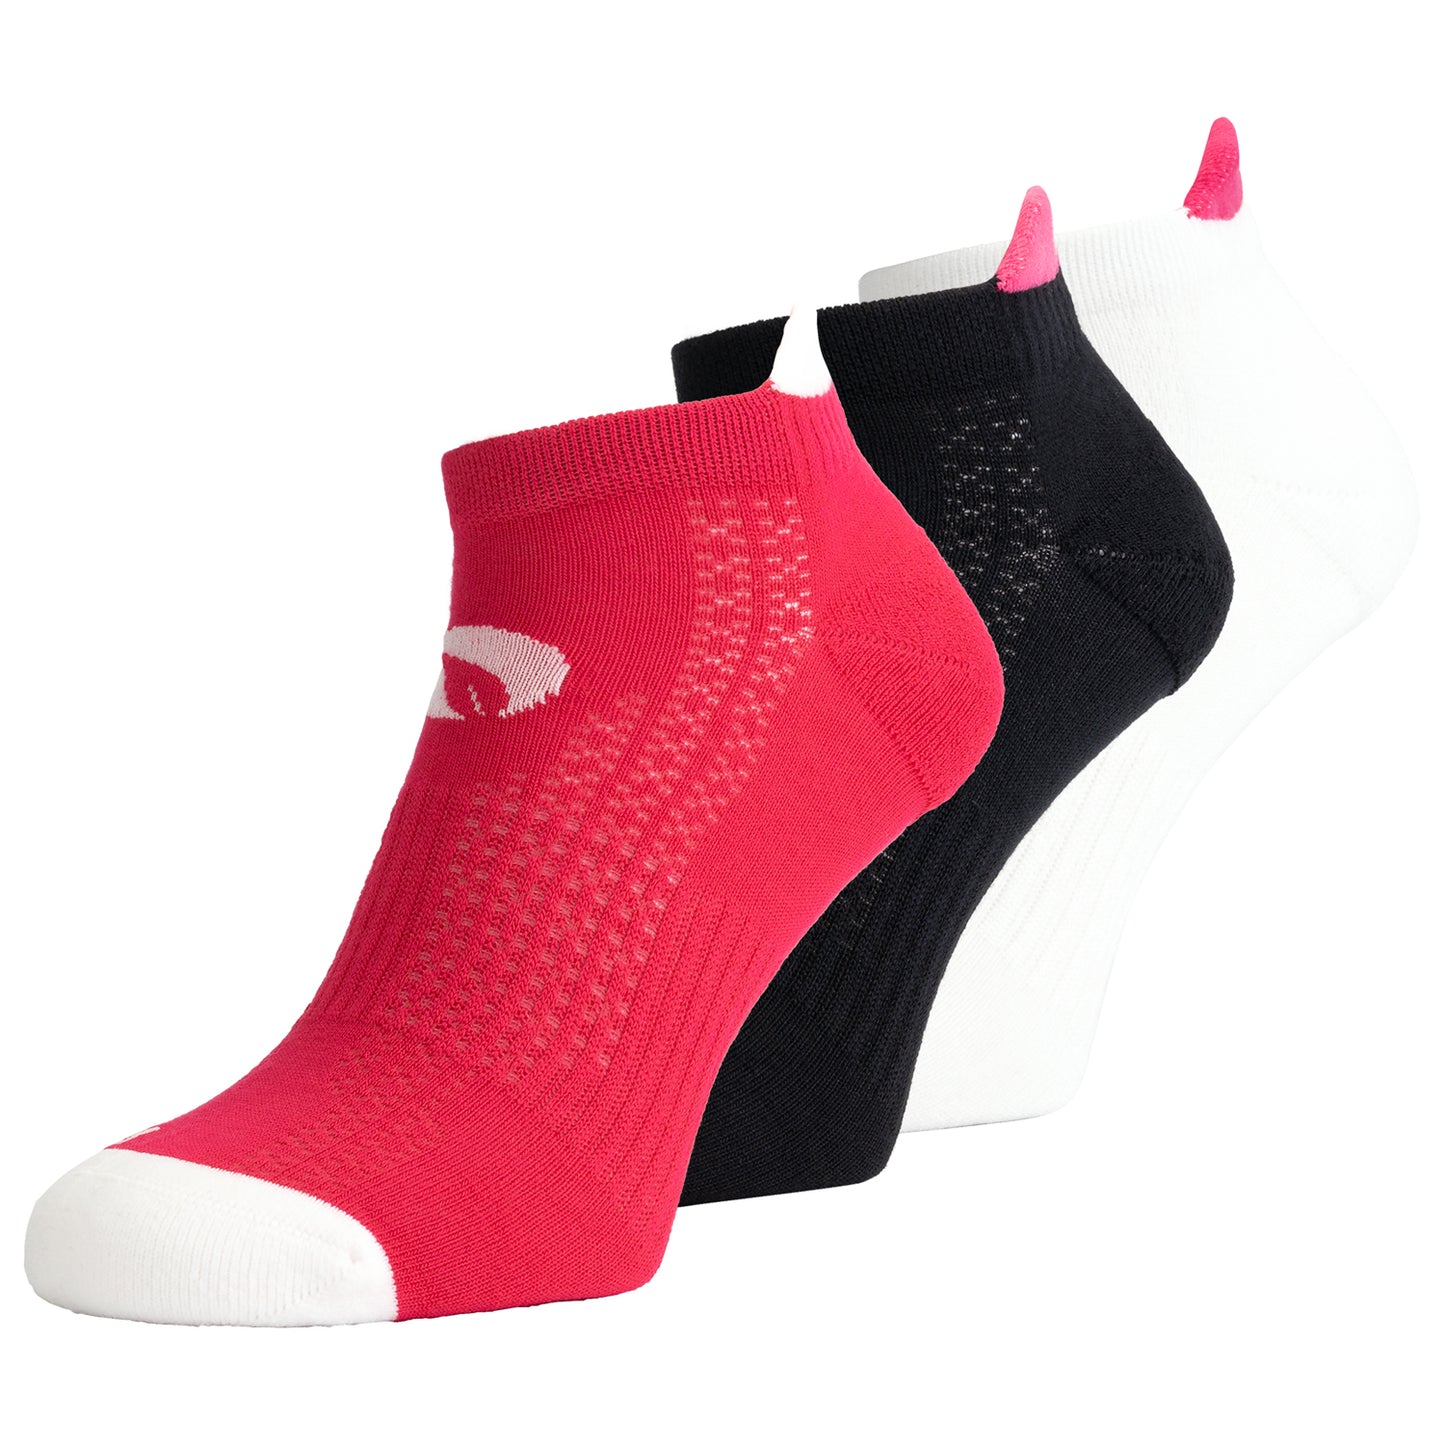 Bamrocks Chaussettes Bamboo Fitness 3 paires Rose